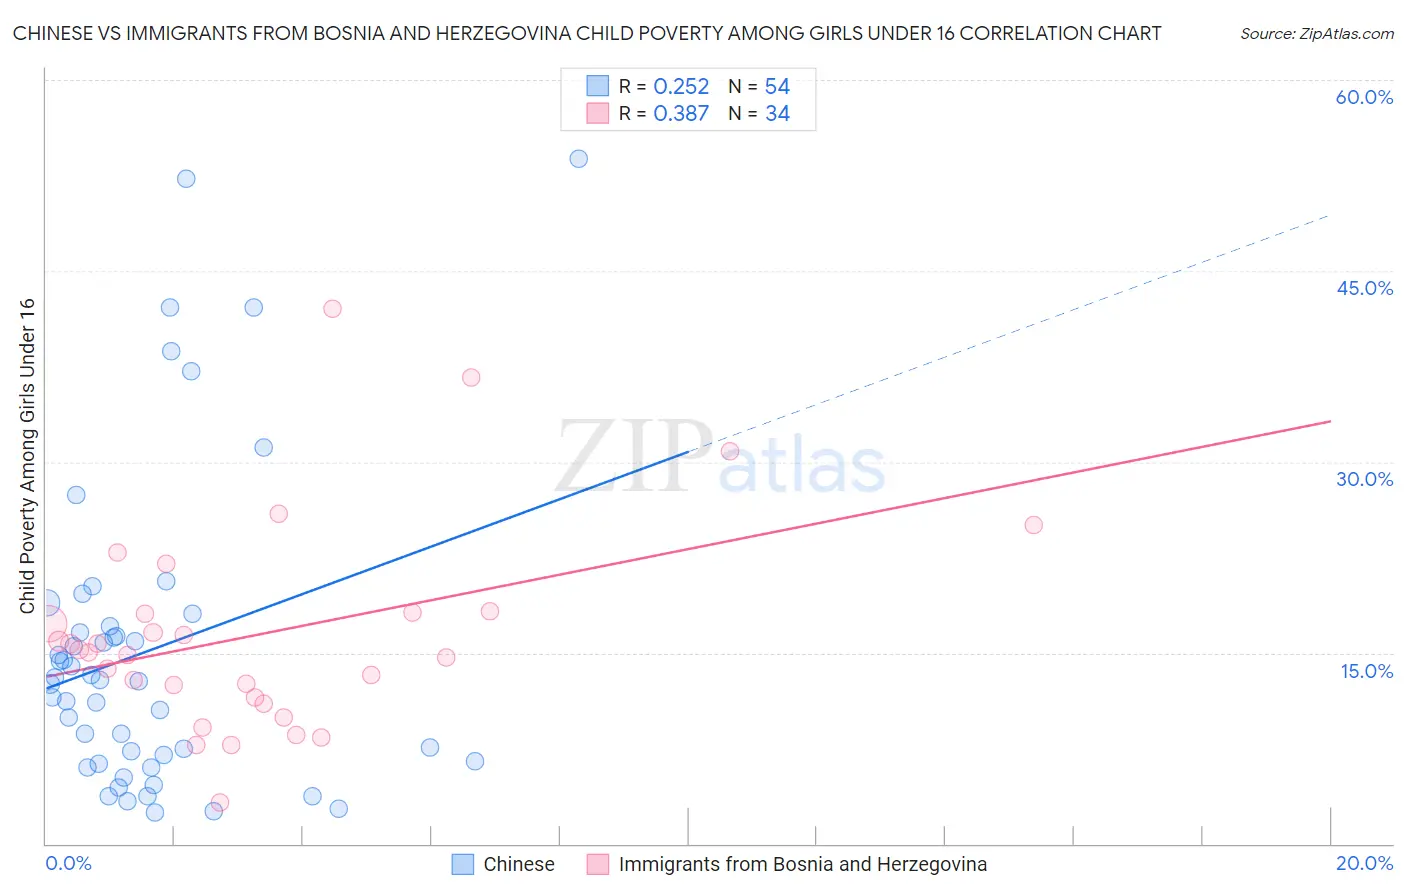 Chinese vs Immigrants from Bosnia and Herzegovina Child Poverty Among Girls Under 16